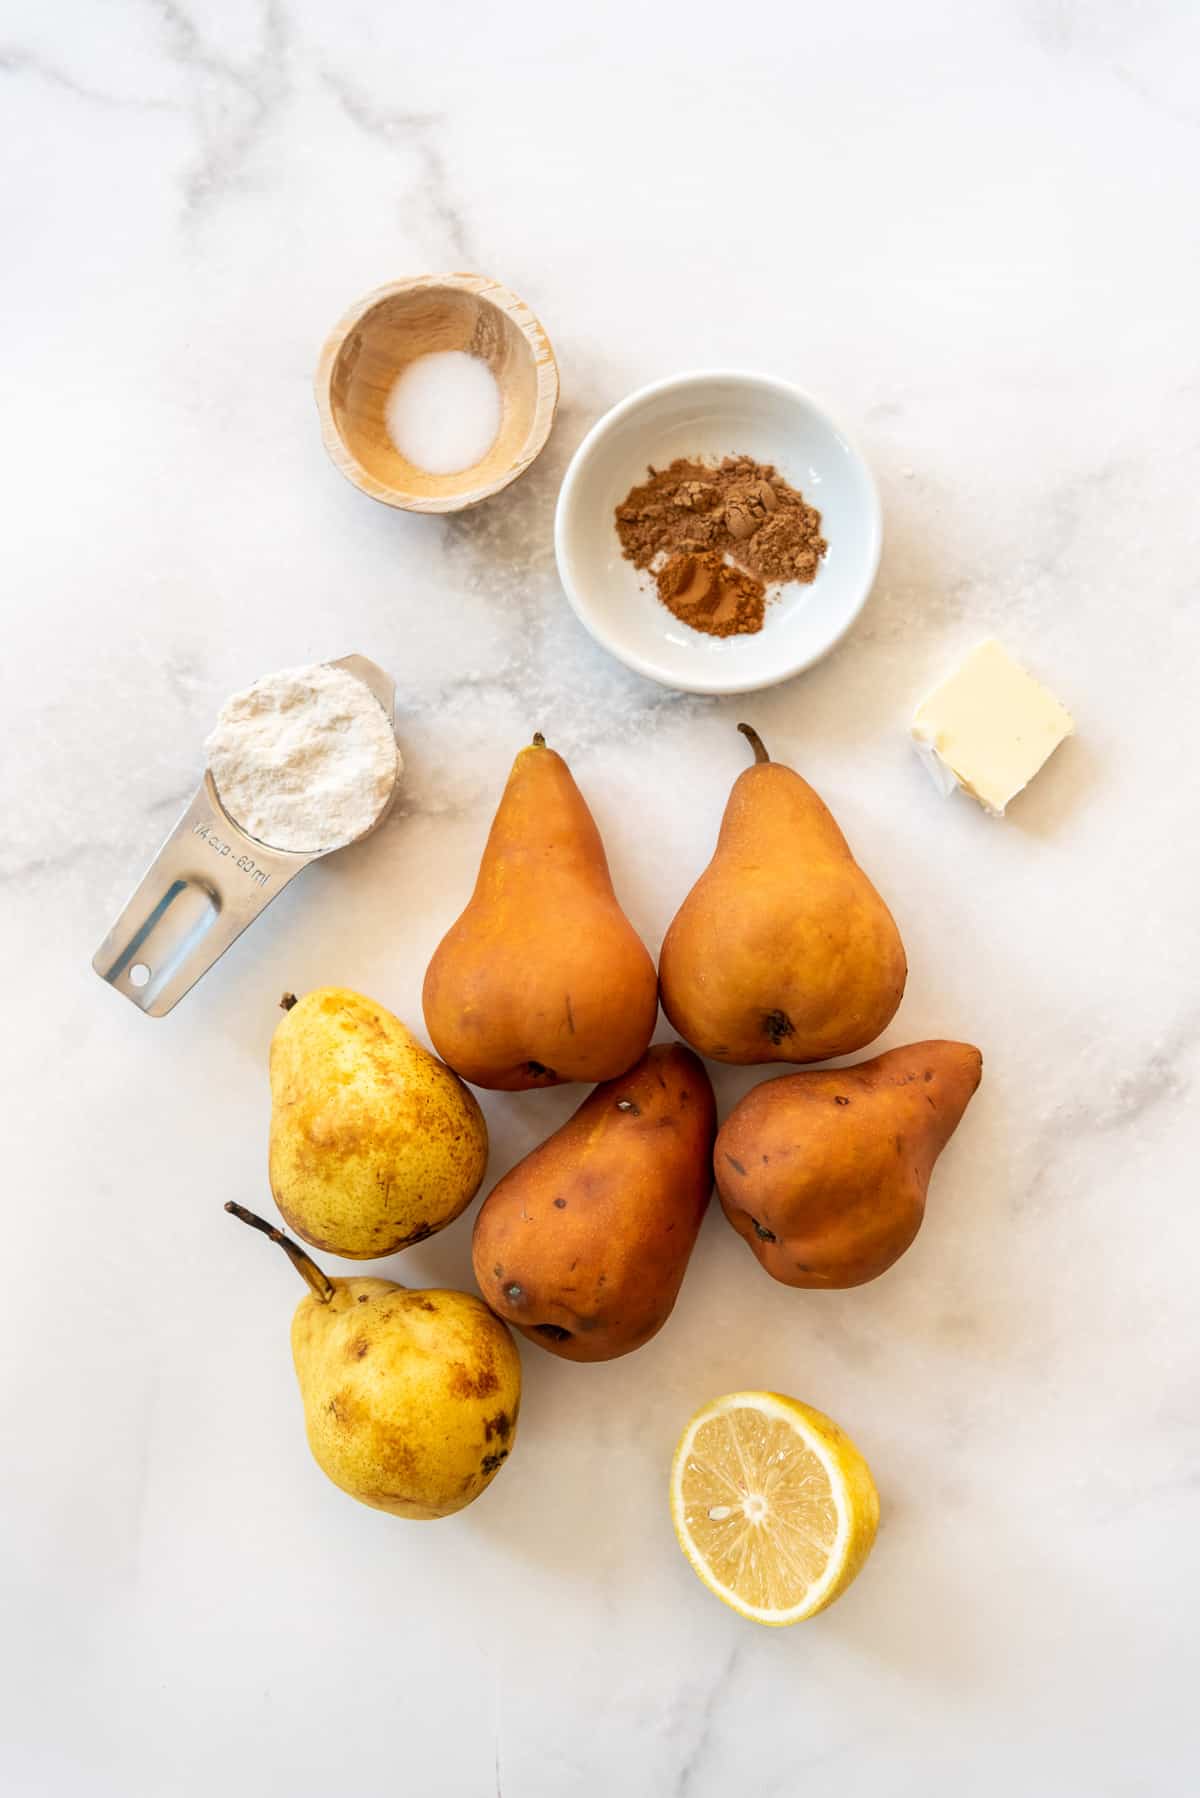 Ingredients for pear pie filling.